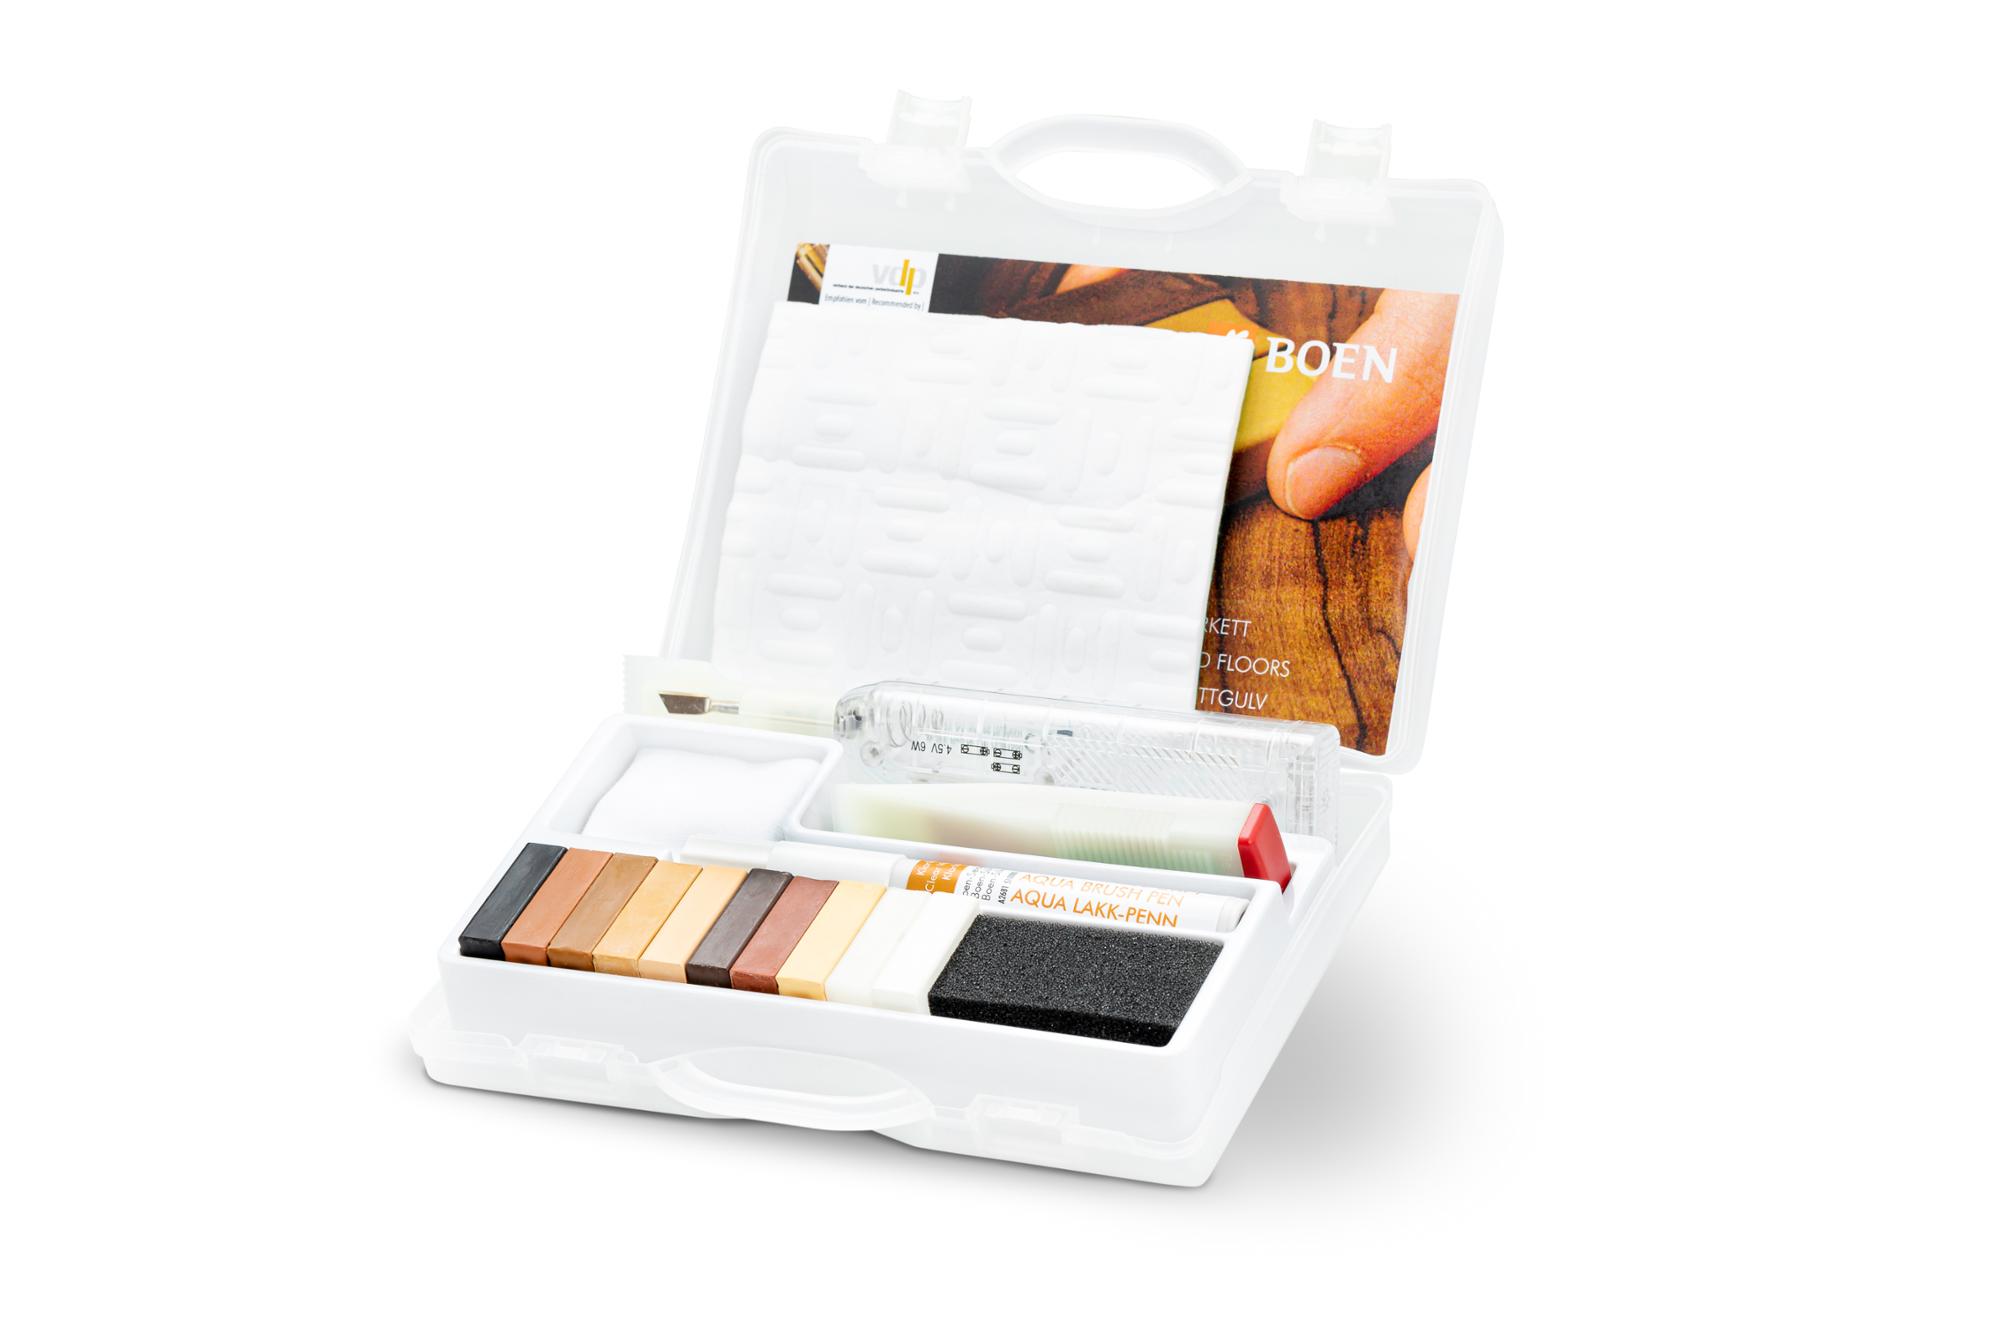 BOEN Profi repair kit for parquet (Live Pure)

Content: 10 wax sticks,
with melter and varnish pen.